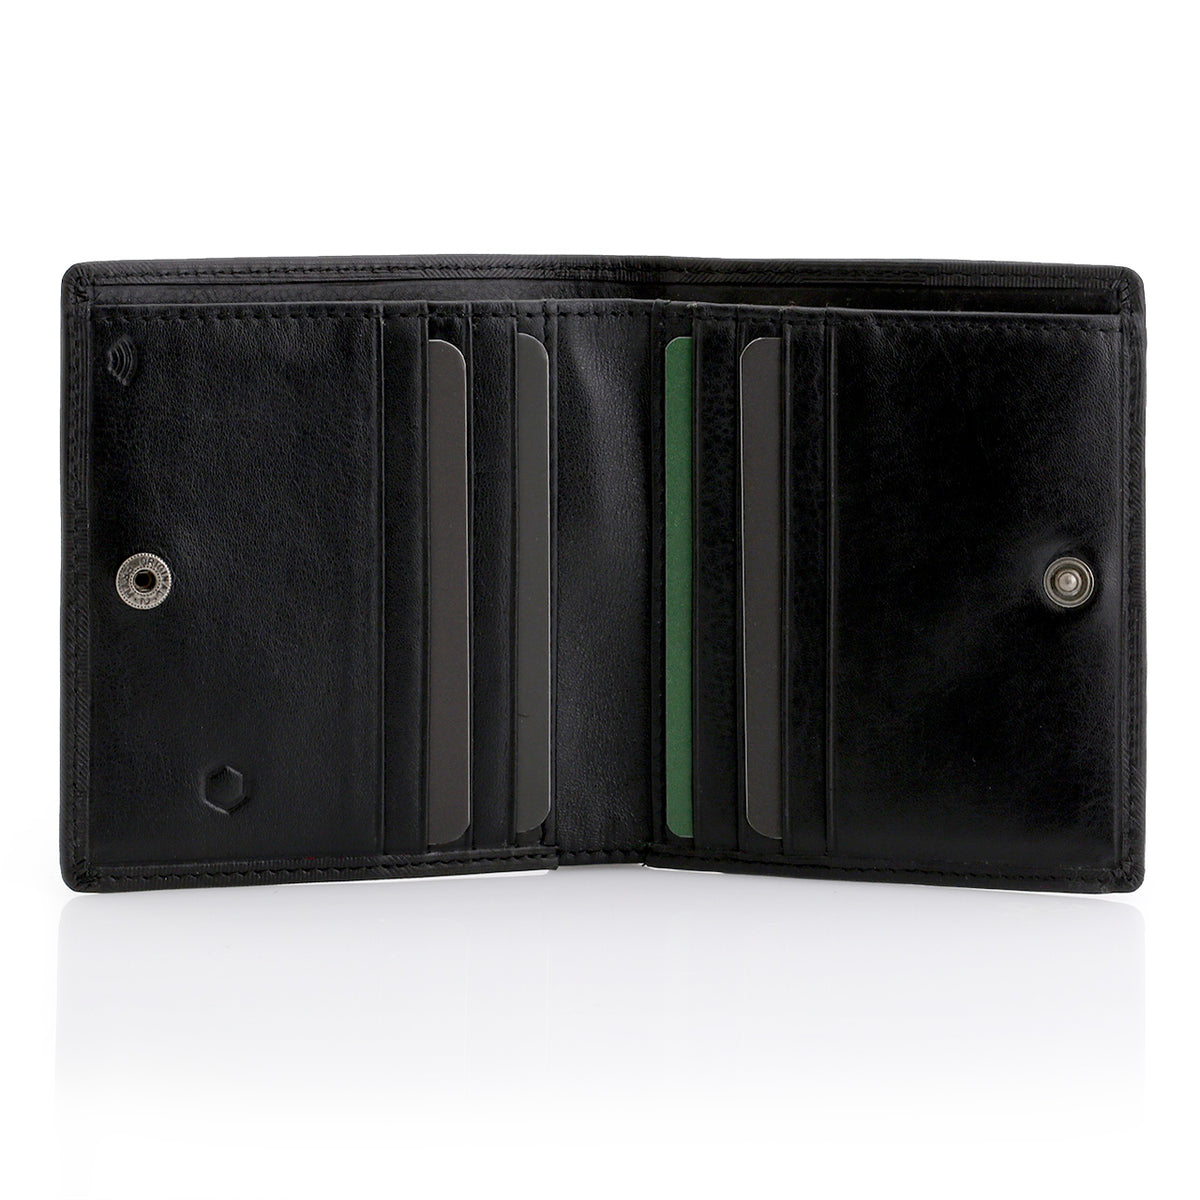 Jekyll and Hyde Slim Bifold wallet with Coin pouch inside- Havana Camo colour